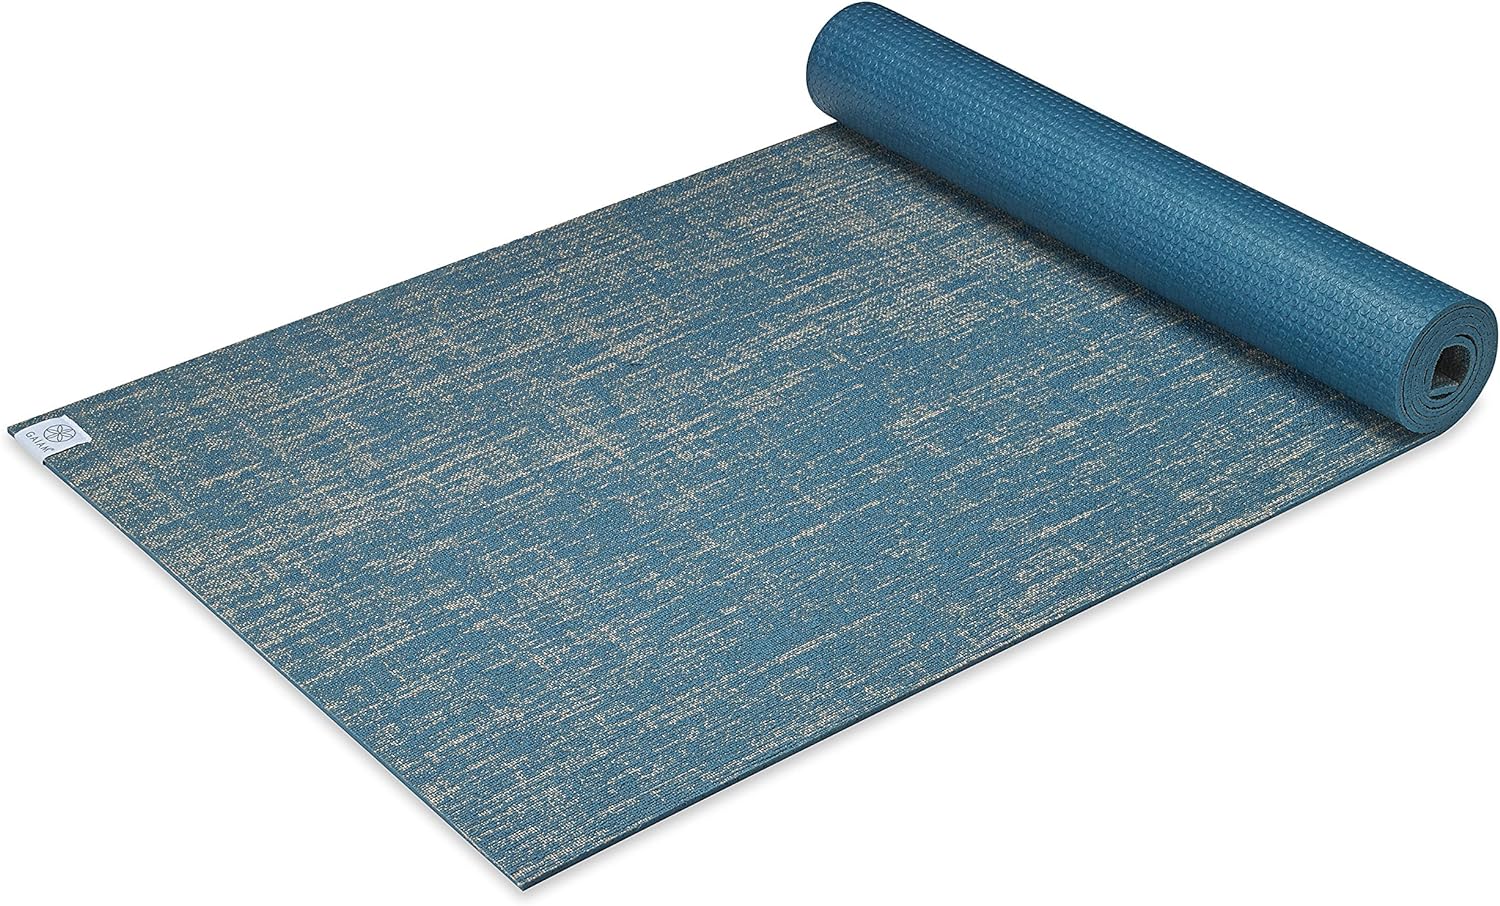 A blue and tan jute yoga mat from Gaiam